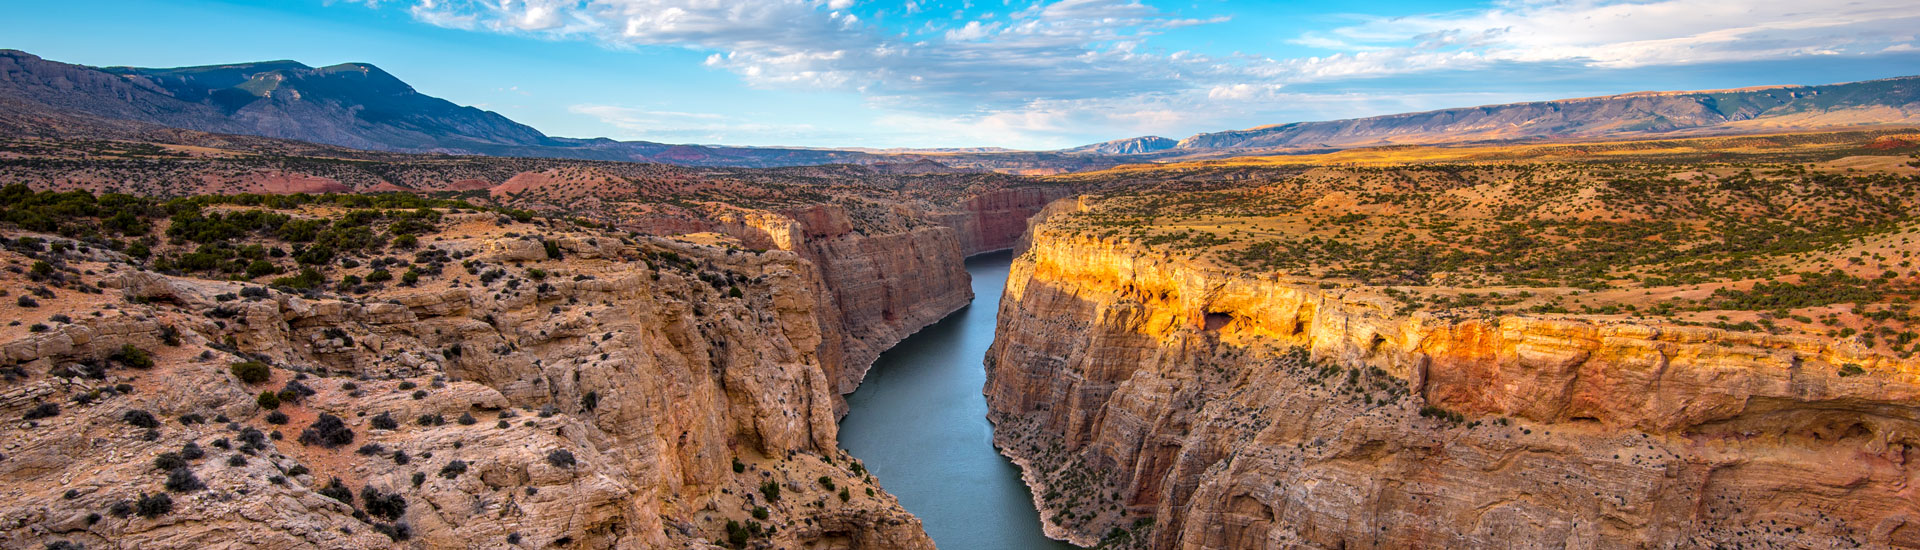 Picture of a desert with a river flowing through a deep canyon